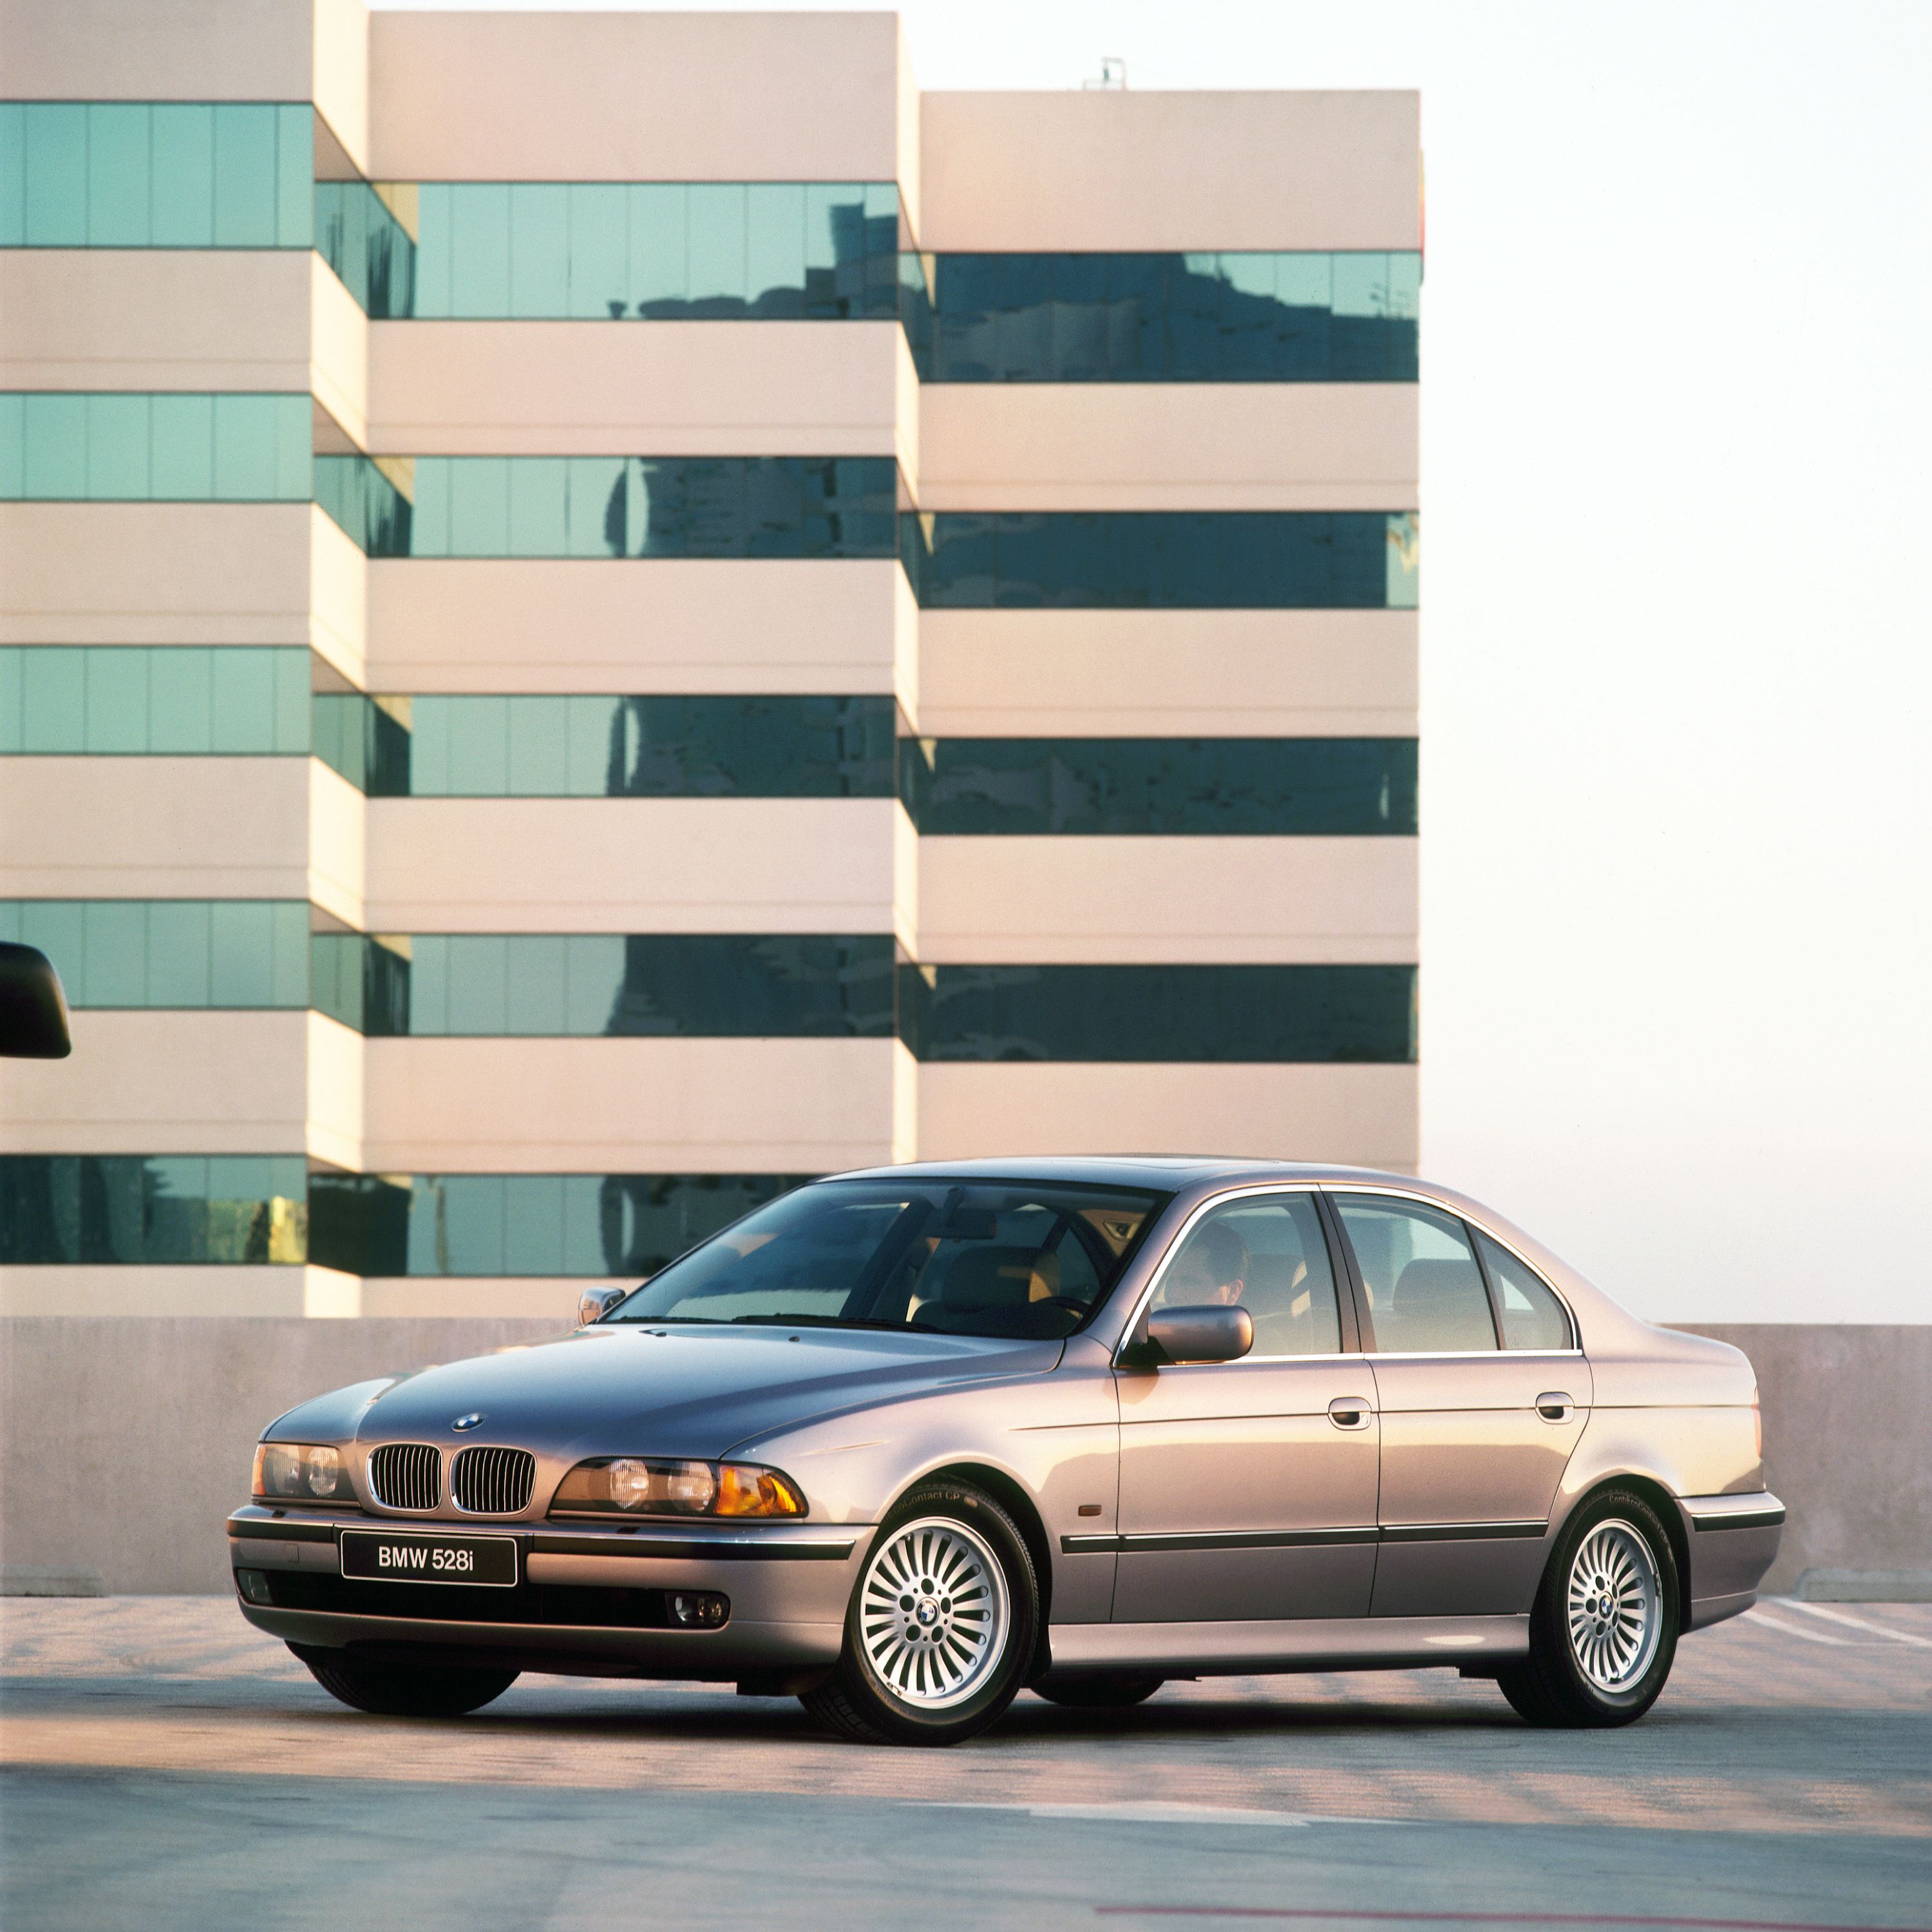 BMW 5 Series Sedan (E39) three-quarter side view while parked on the roof of a parking garage